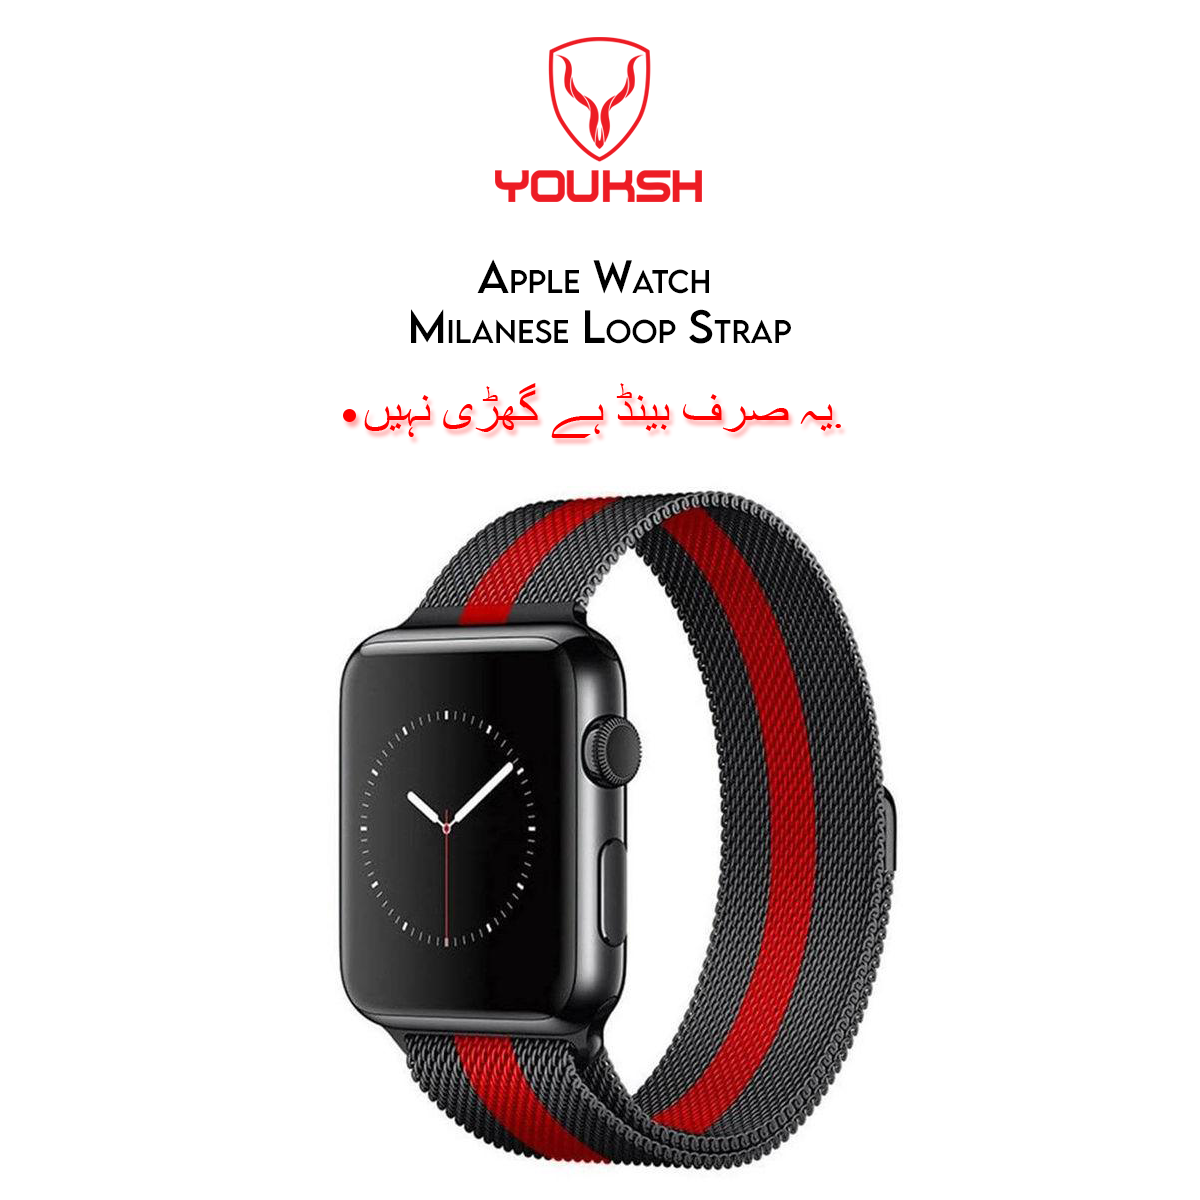 YOUKSH Apple Watch - Milanese Dual tone - Stainless Steel Strap - 38mm/40mm, For Apple Watch Series 1/2/3/4/5/6.